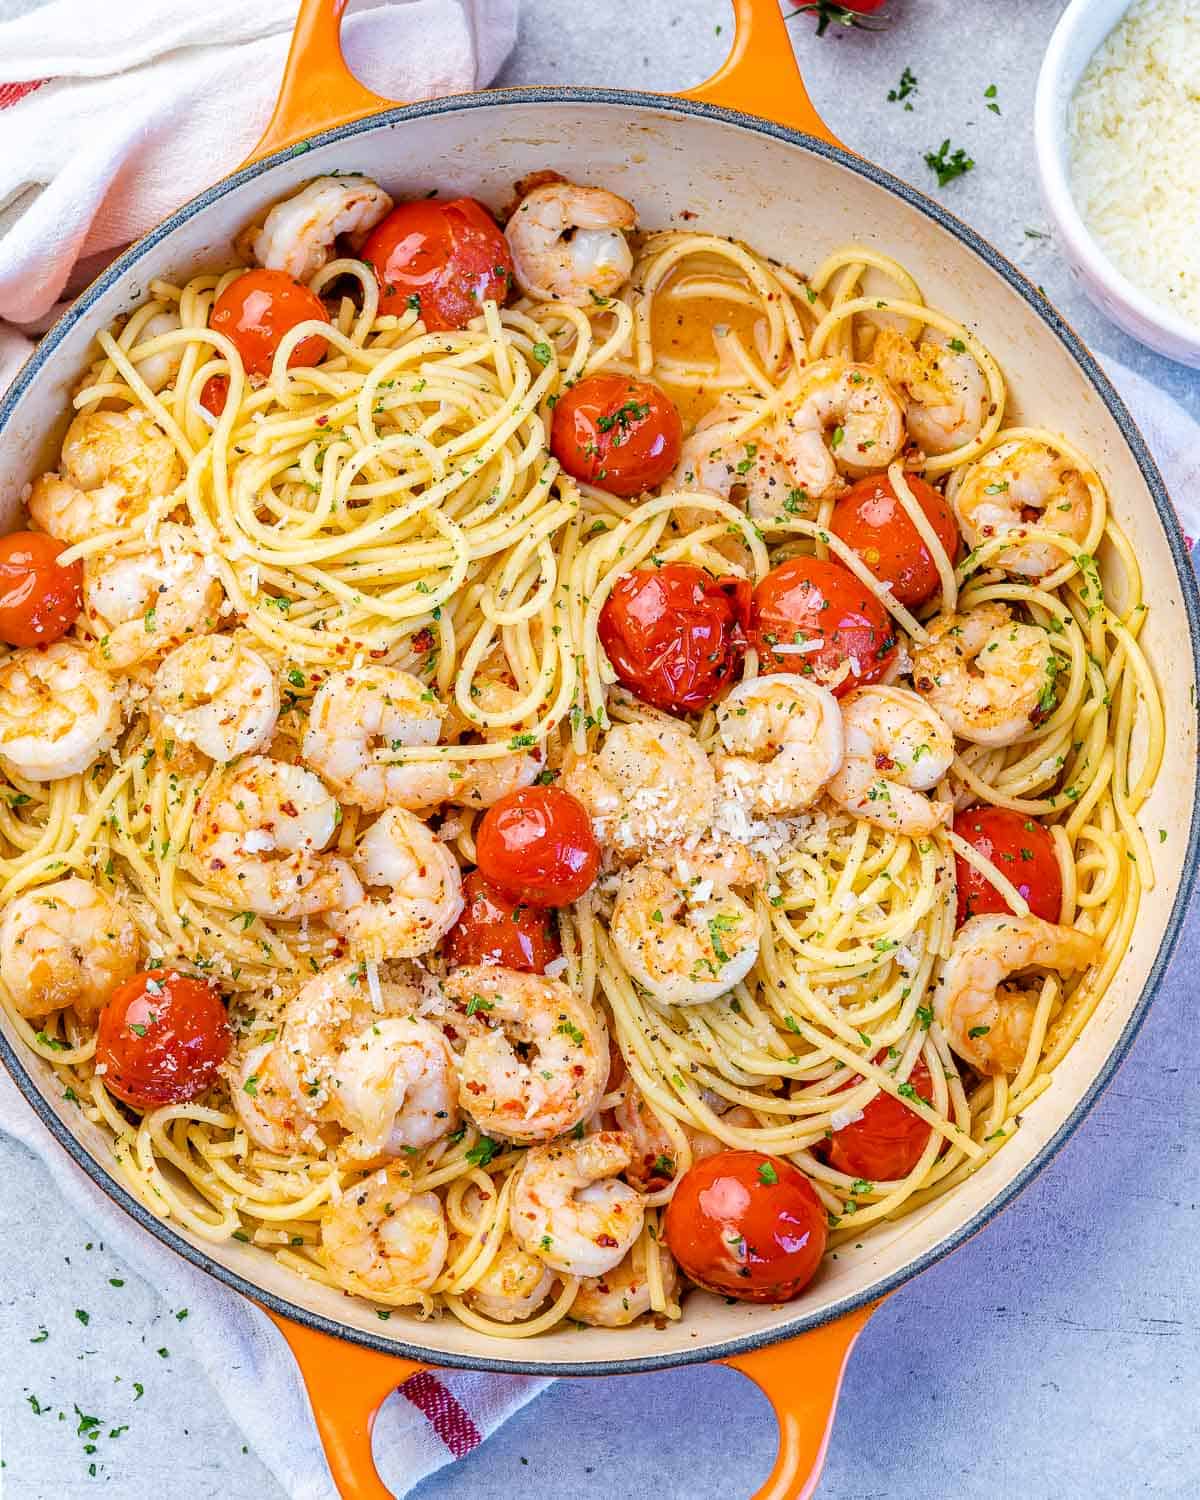 Easy Garlic Shrimp Pasta (with Video) - Healthy Fitness Meals